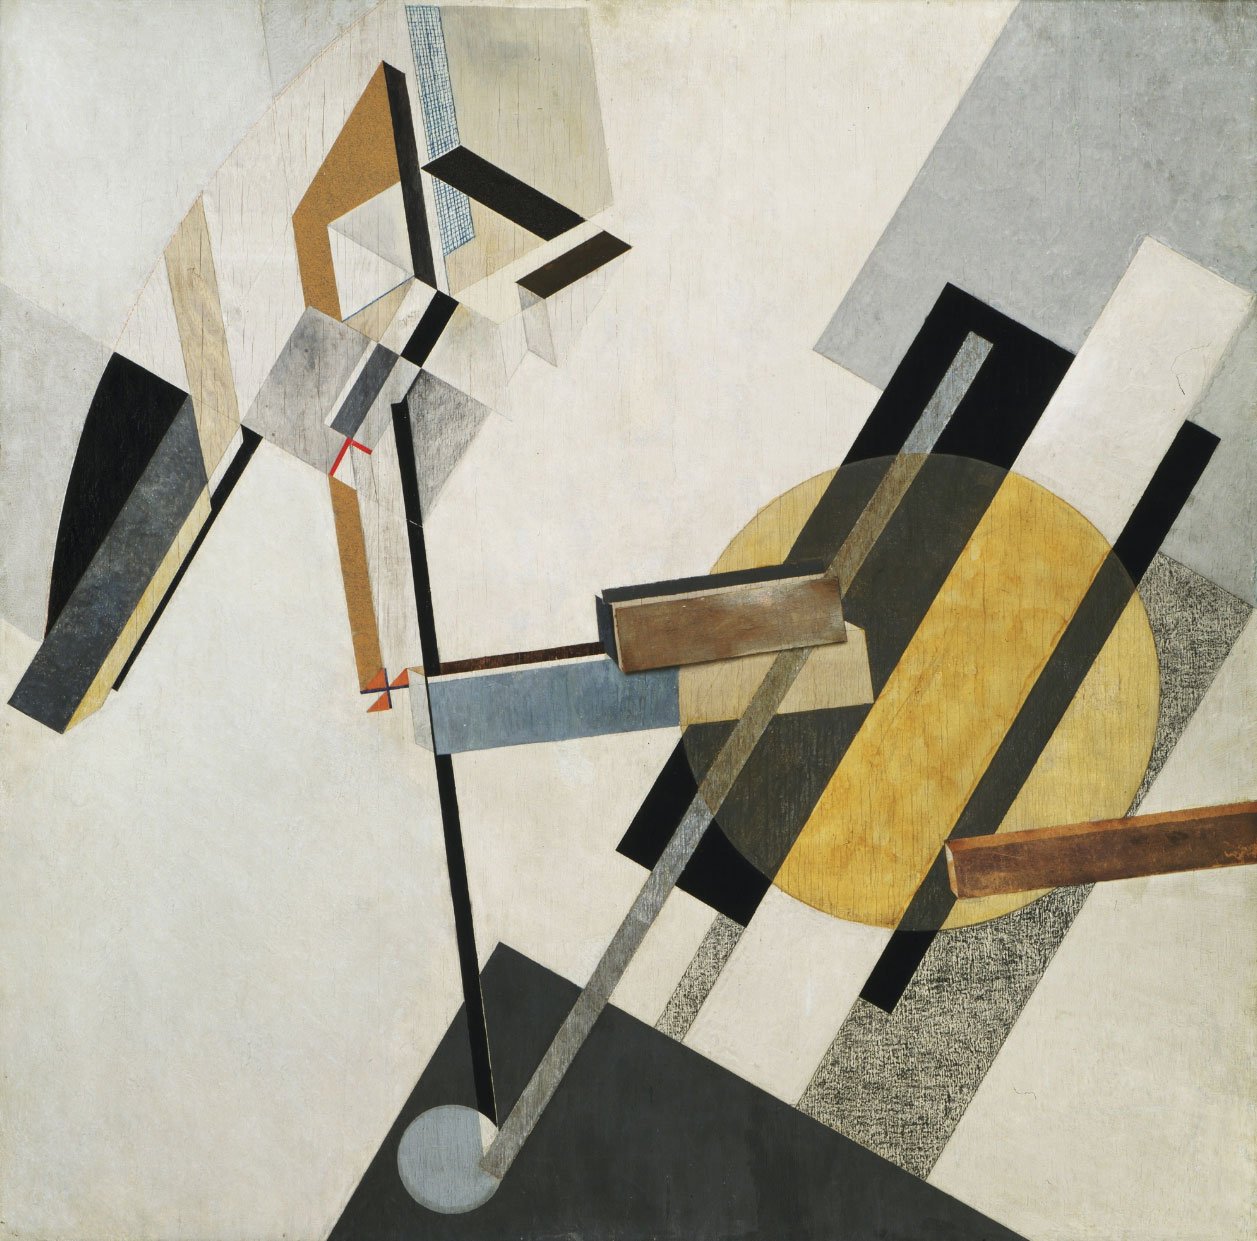 El Lissitzky, Proun 19D(1920 or 1921)
On view at The Museum of Modern Art, Floor 5, Collection Galleries. 
Medium: Gesso, oil, varnish, crayon, colored papers, sandpaper, graph paper, cardboard, metallic paint, and metal foil on plywoodDimensions: 38 3/8 x 38 1/4" (97.5 x 97.2 cm)Credit: Katherine S. Dreier BequestCopyright © 2018 Artists Rights Society (ARS), New York / VG Bild-Kunst, Bonn.
source MOMA.‘for illustrative purposes only’